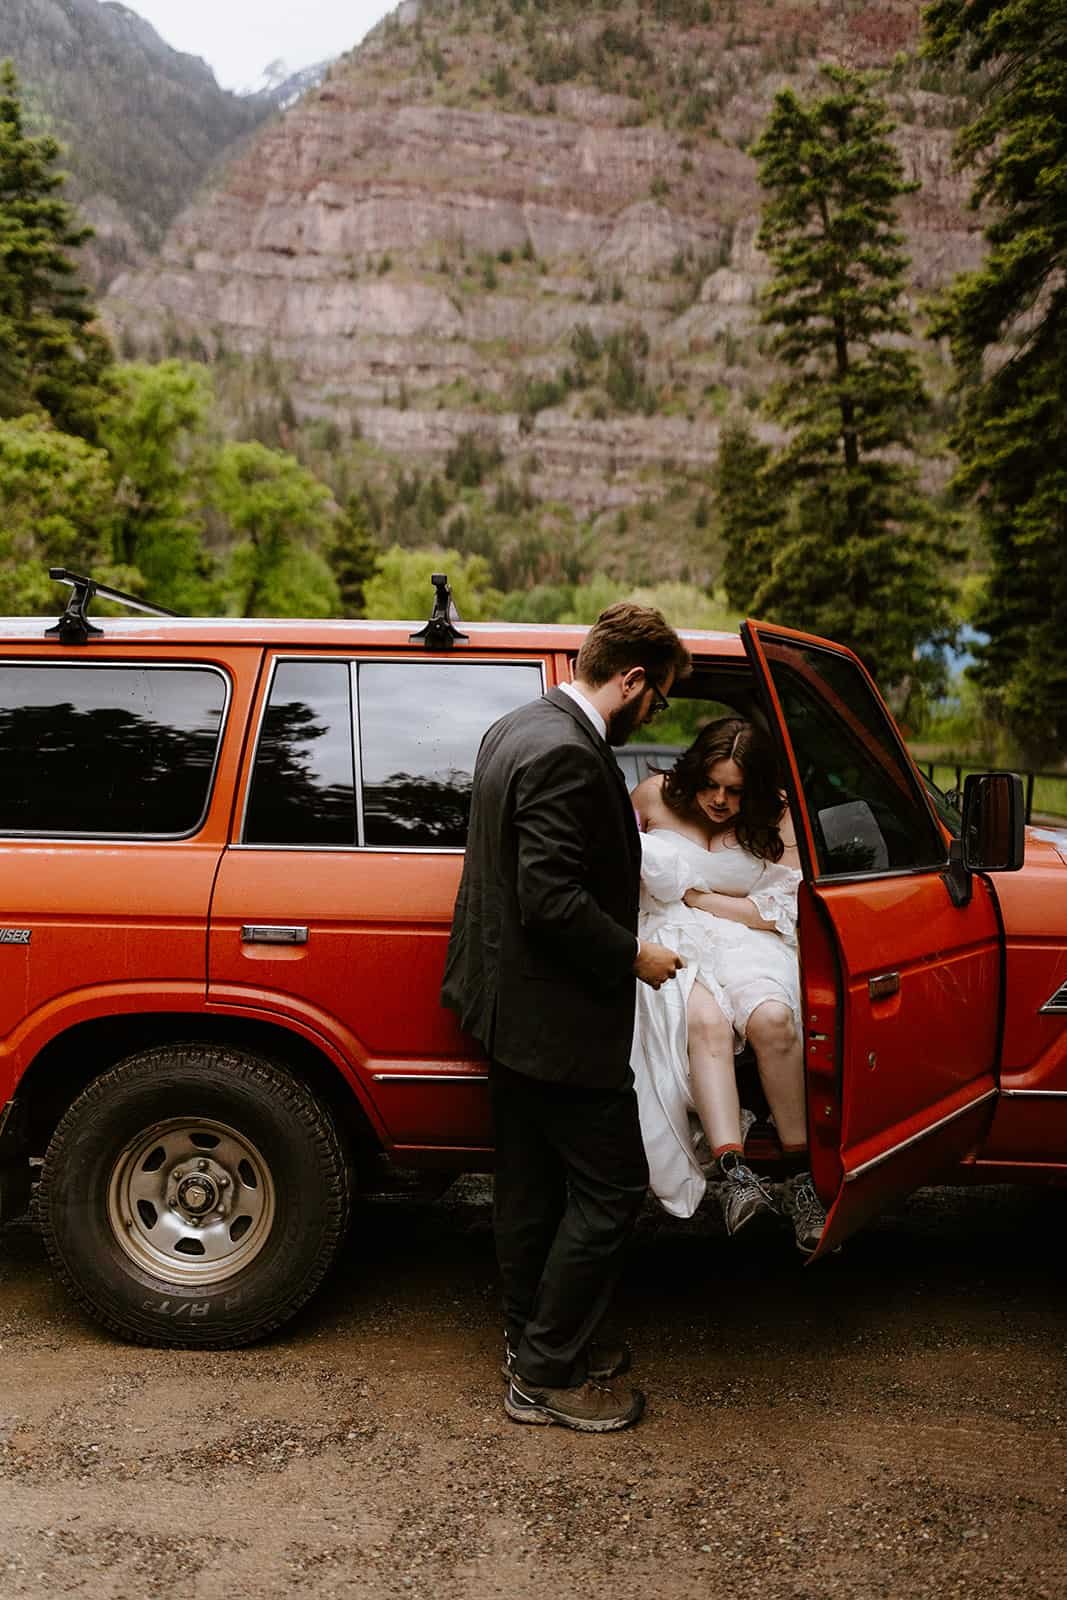 A man helps a woman in a wedding dress out of a red SUV